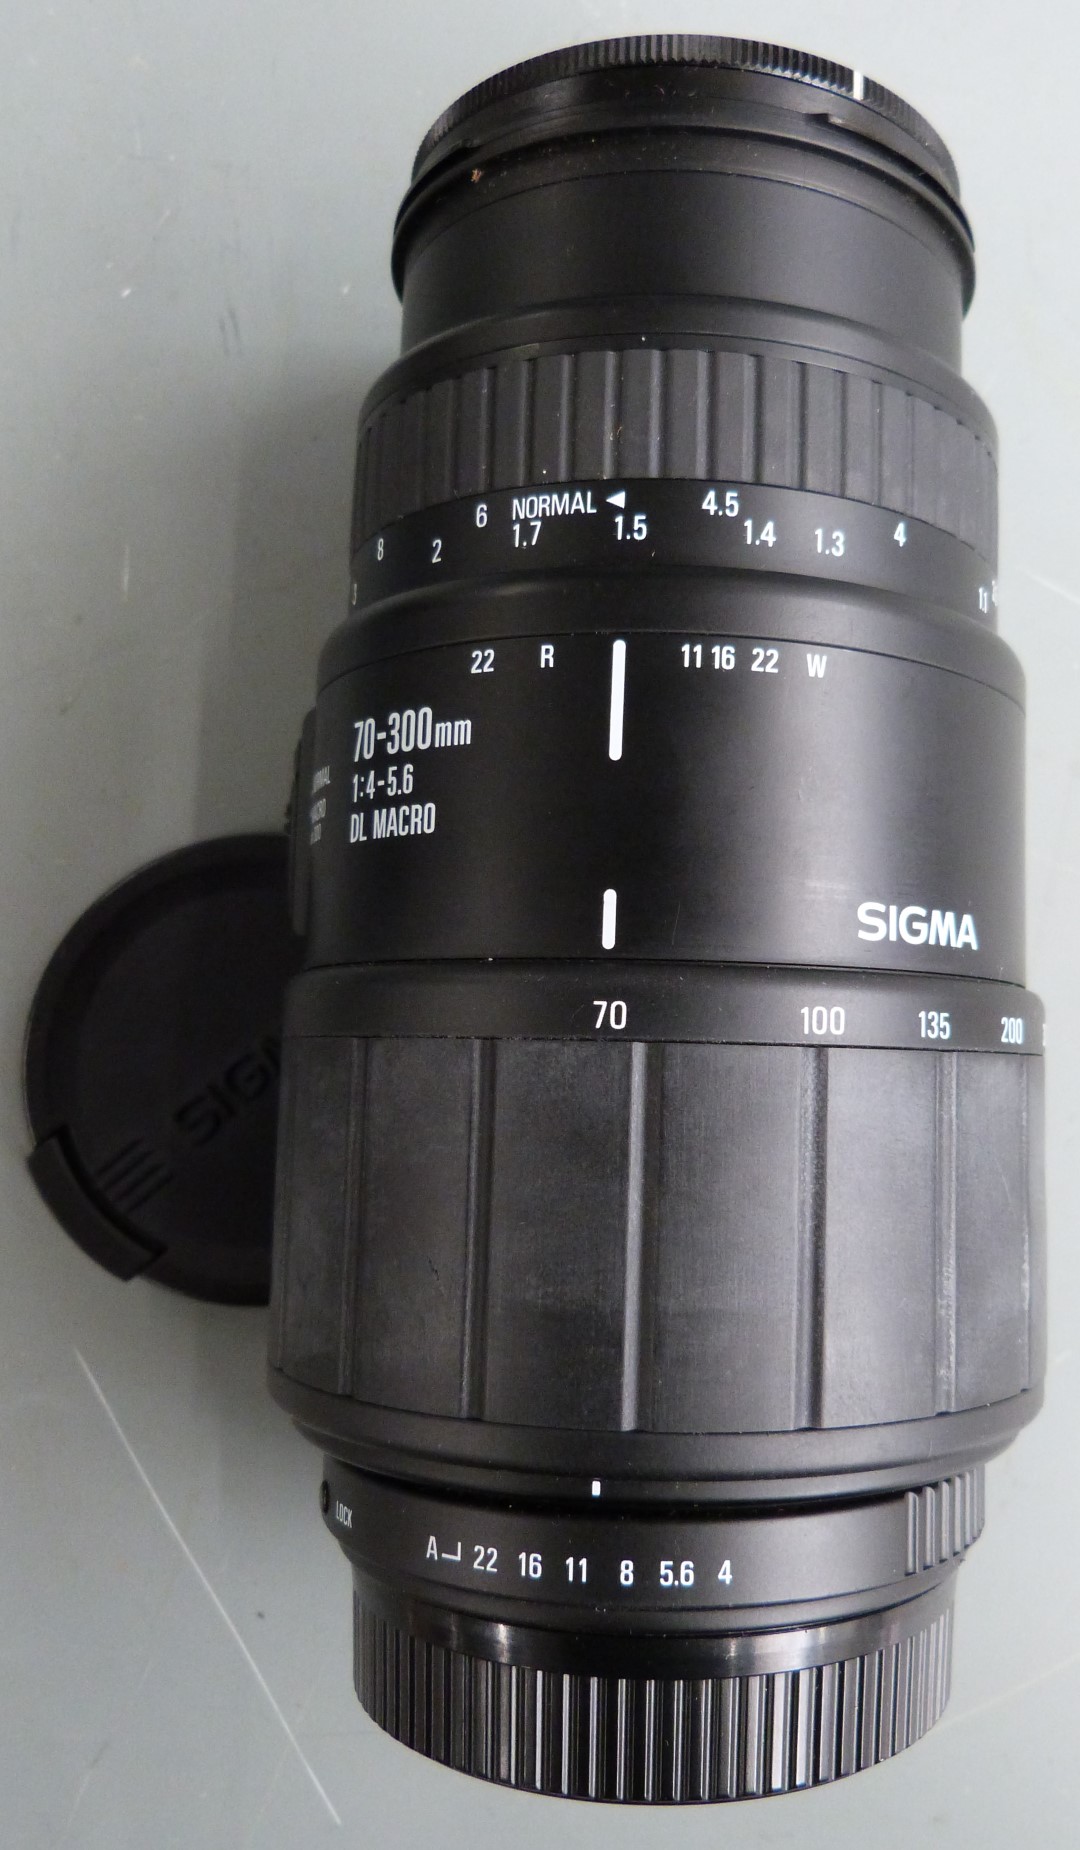 Pentax MZ-30 SLR camera with 28-300mm 1:3.5-6.3 and 70-300 1:4-5.6 Sigma zoom lenses, together - Image 5 of 5